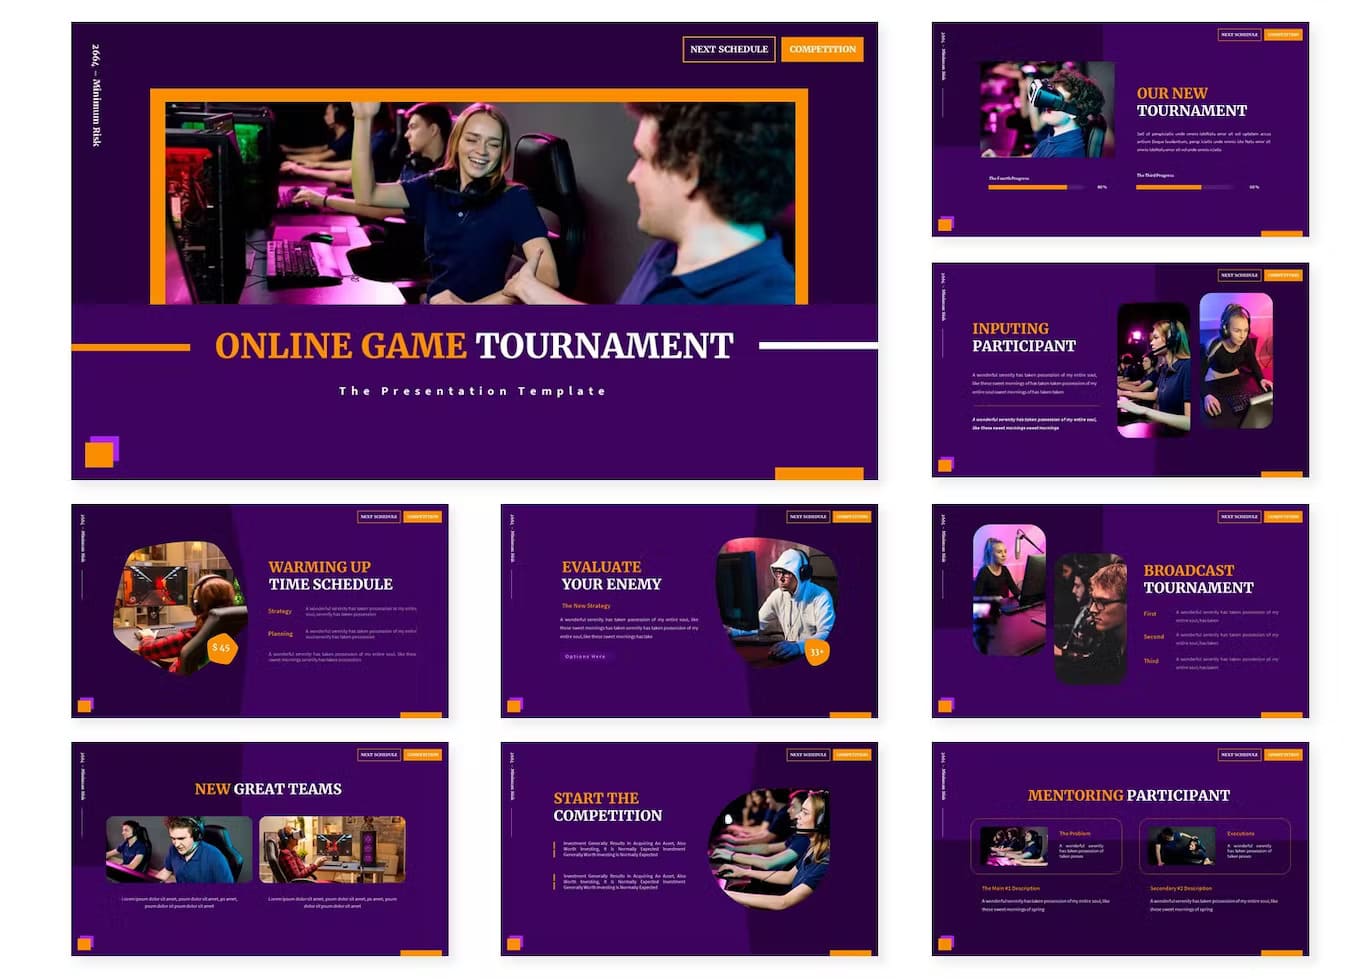 Evaluate your enemy with Online Game Tournament | Keynote Template.